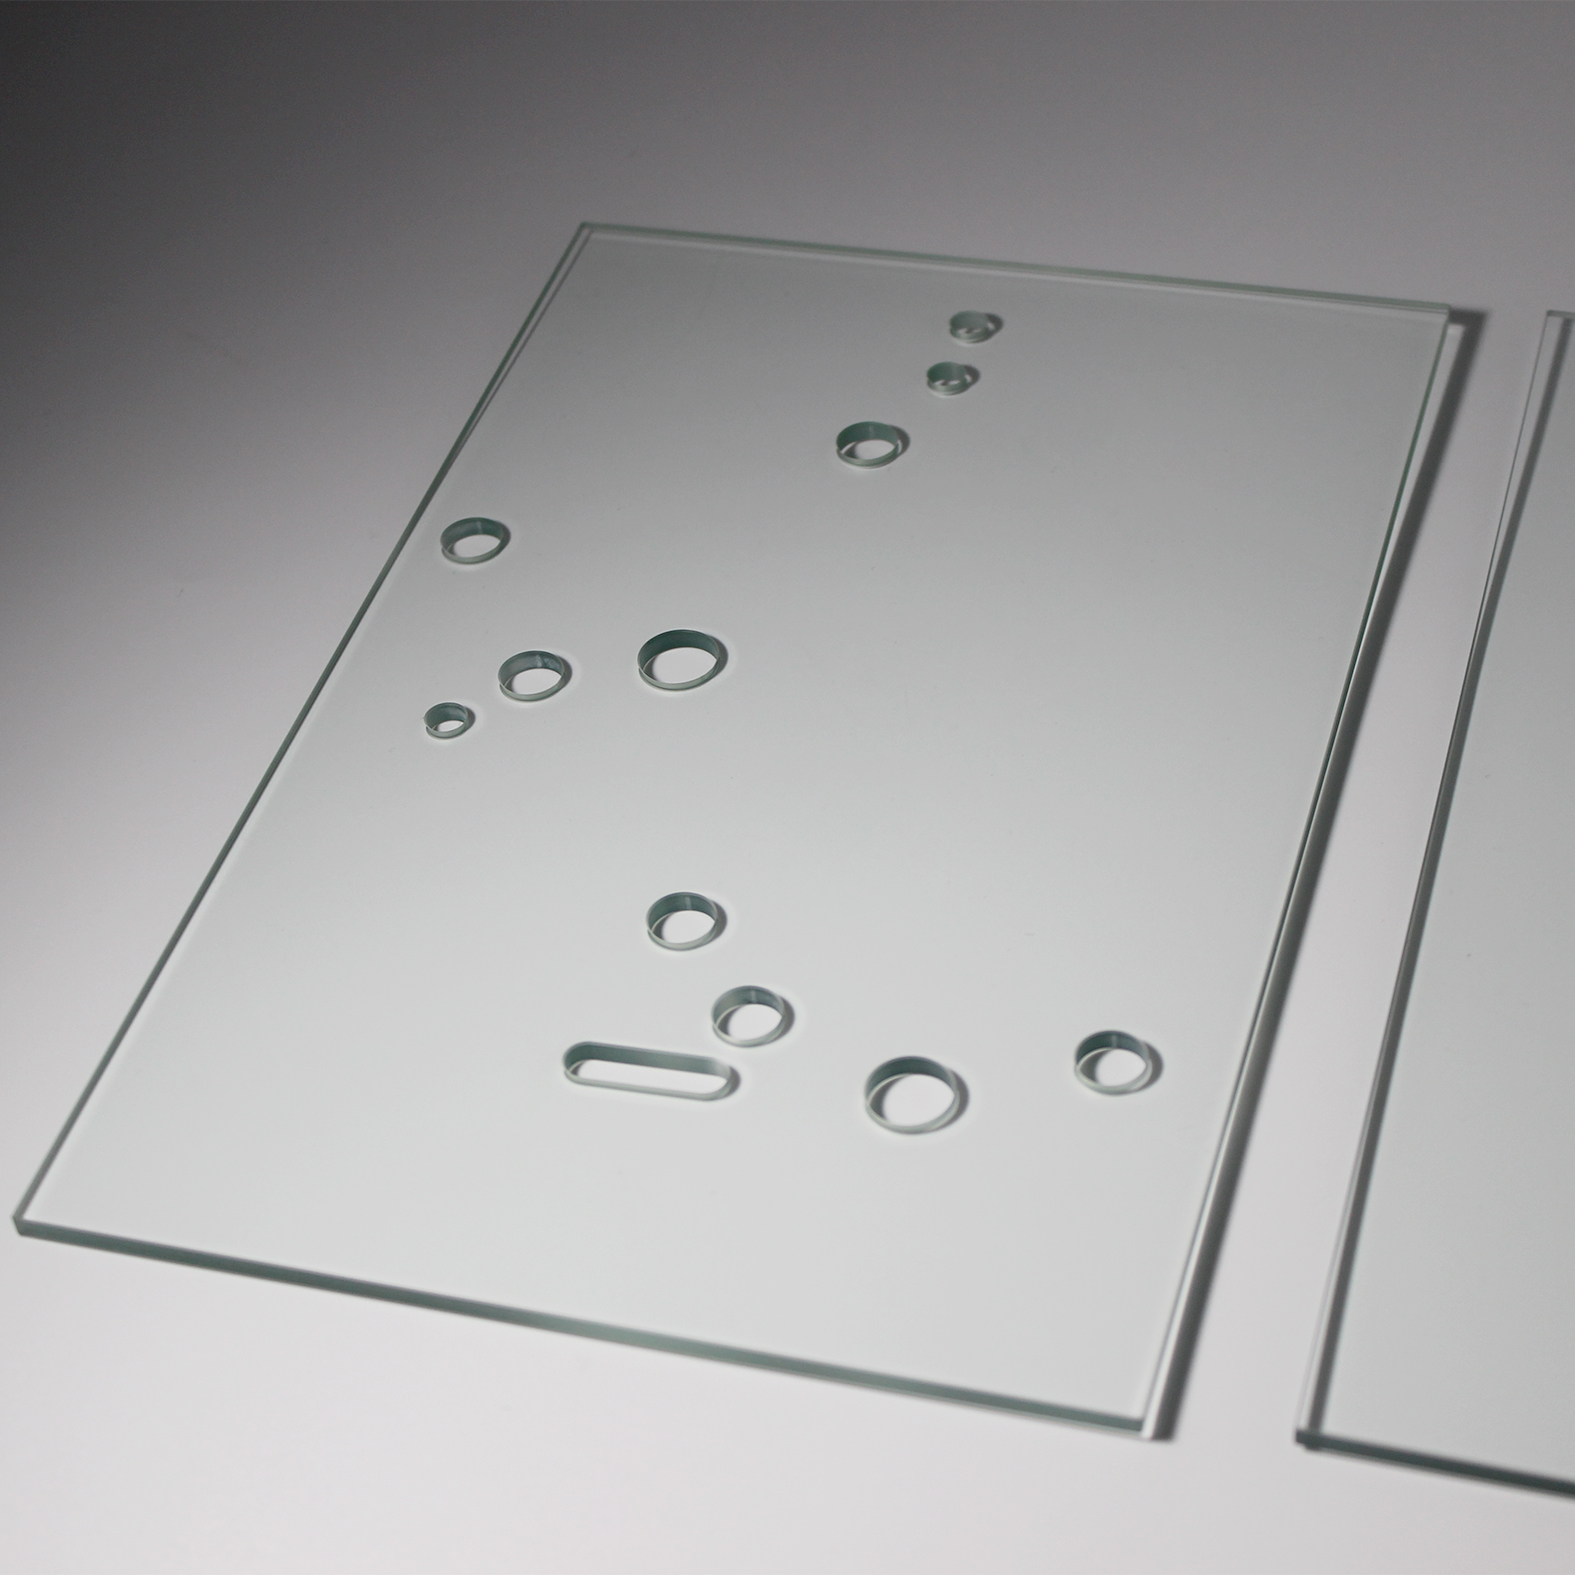 China Supplier Provide Customized Holes Optical Glass Flat